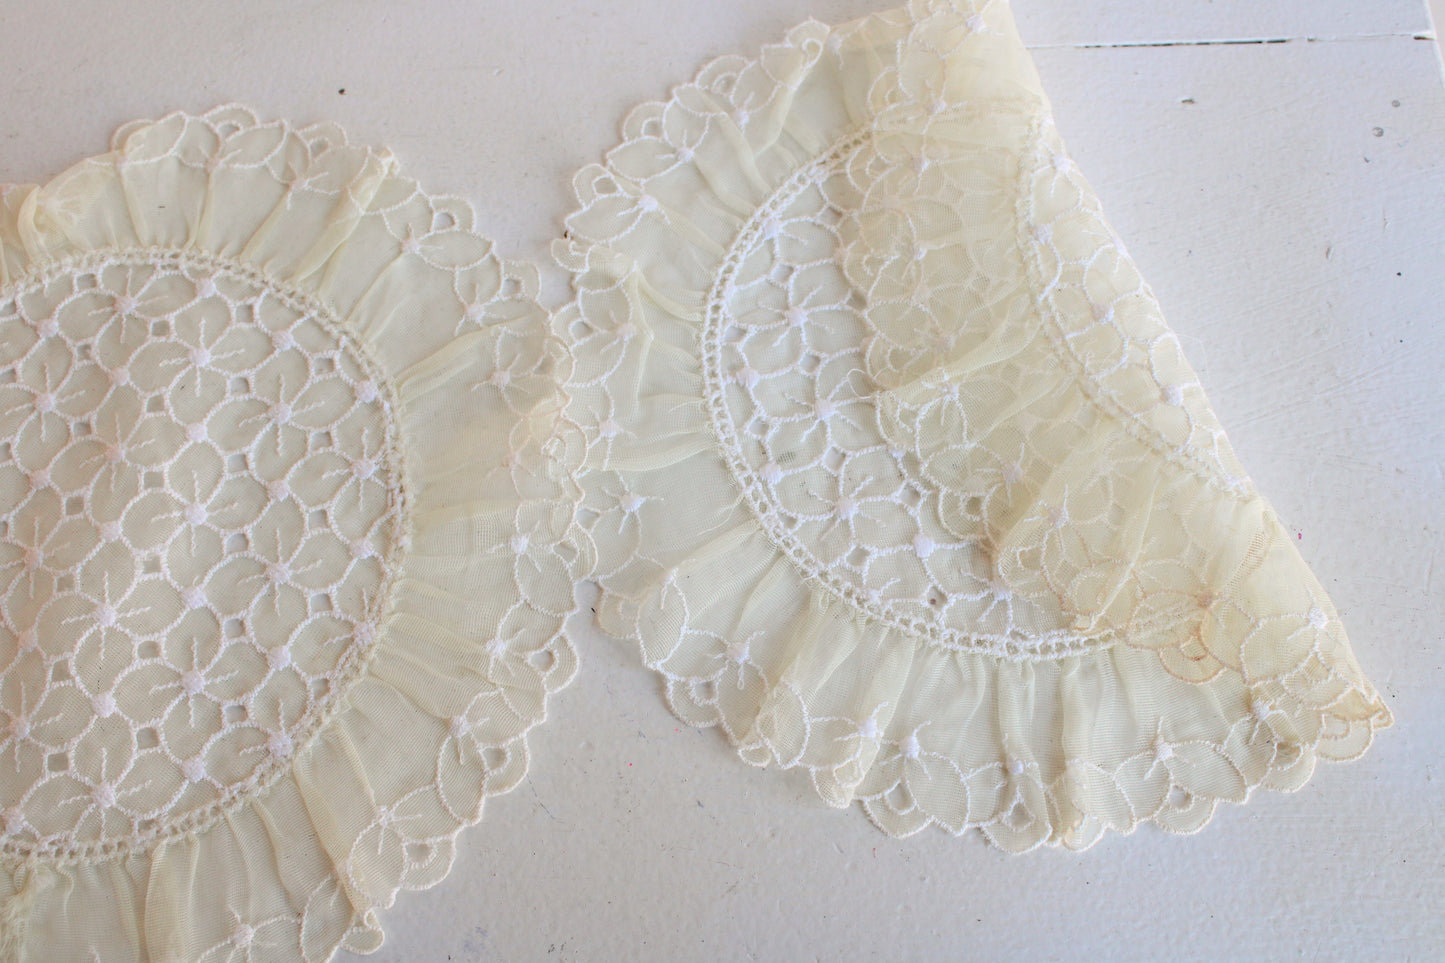 Vintage ivory Doilies with White Embroidery